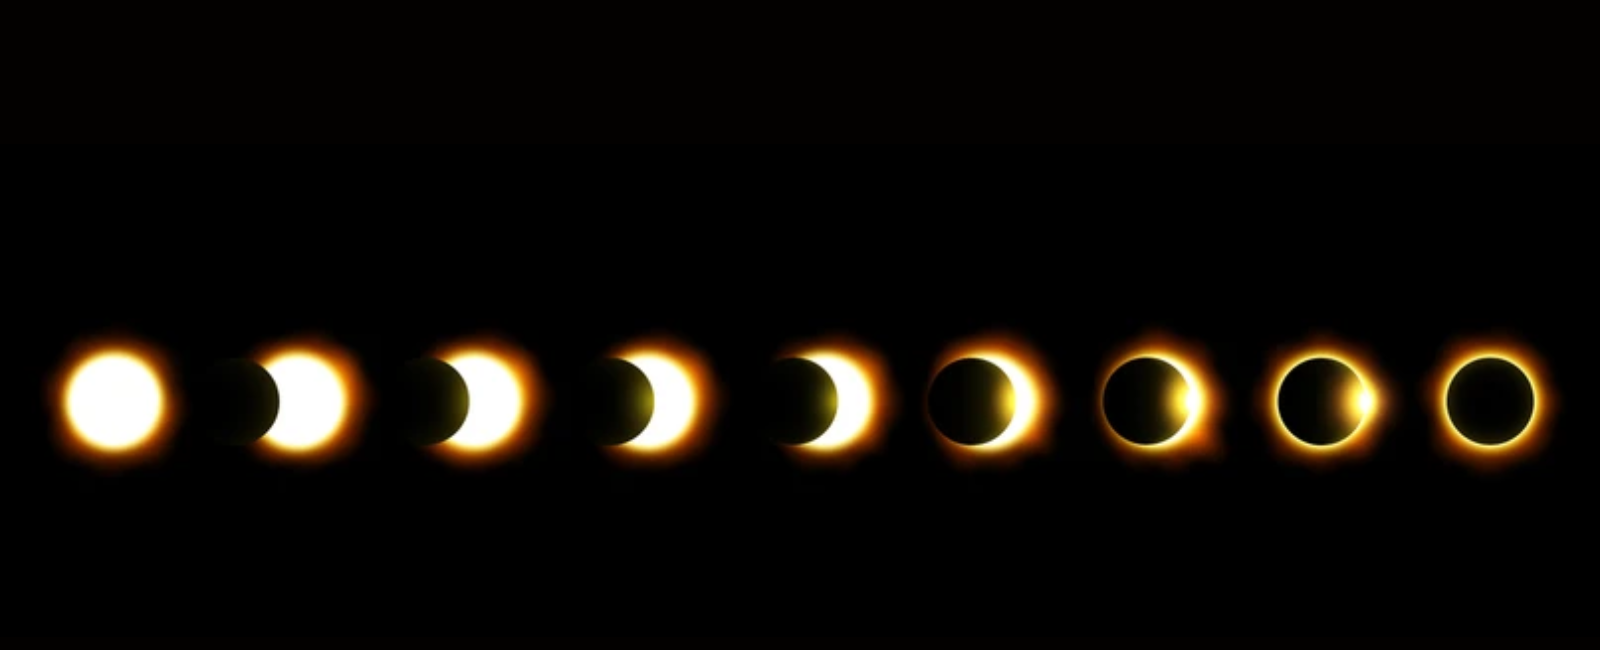 Solar eclipse stages